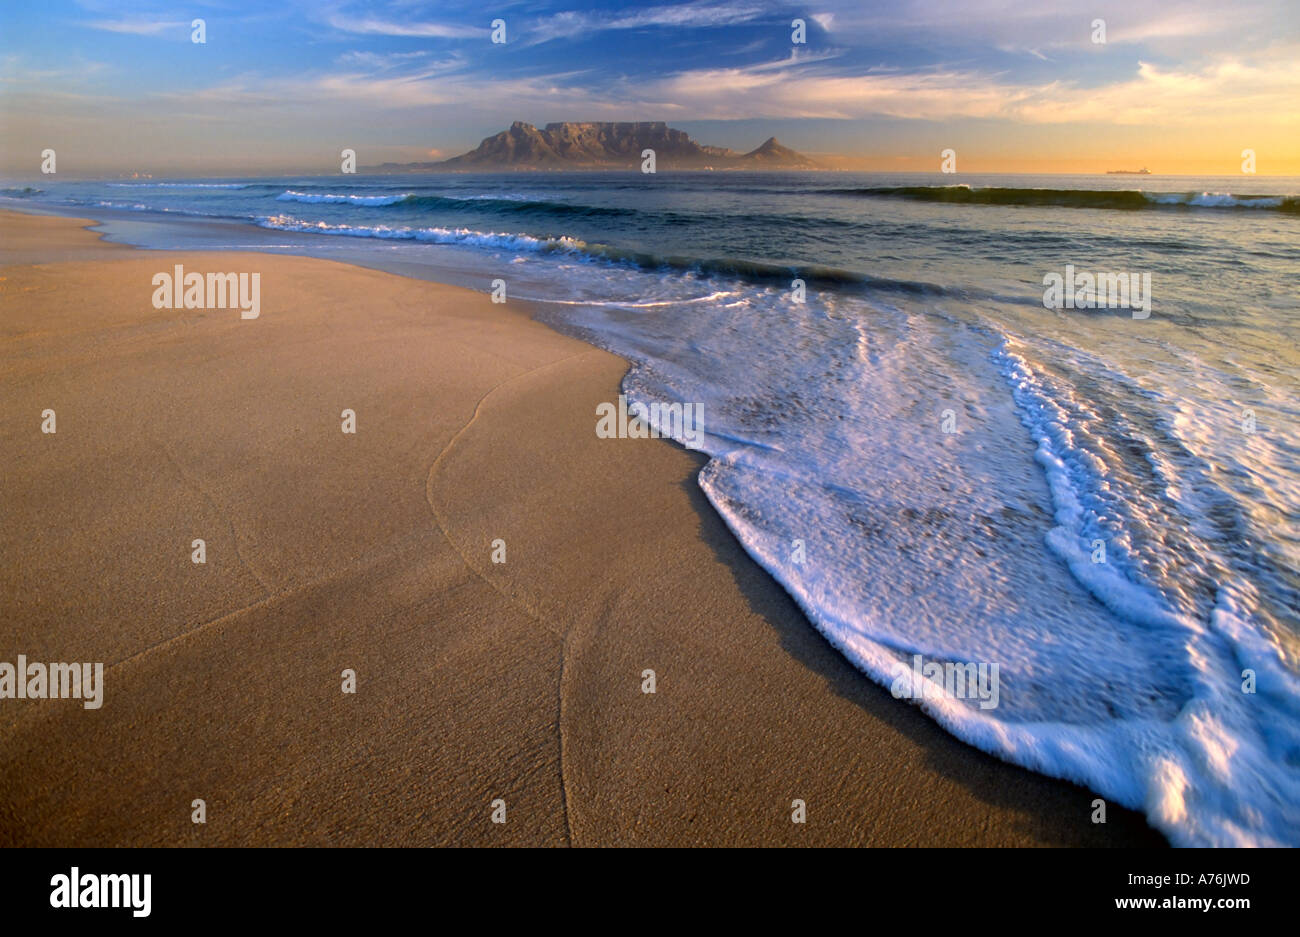 Sunset at Bloubergstrand beach with Table Mountain on the horizon. Stock Photo